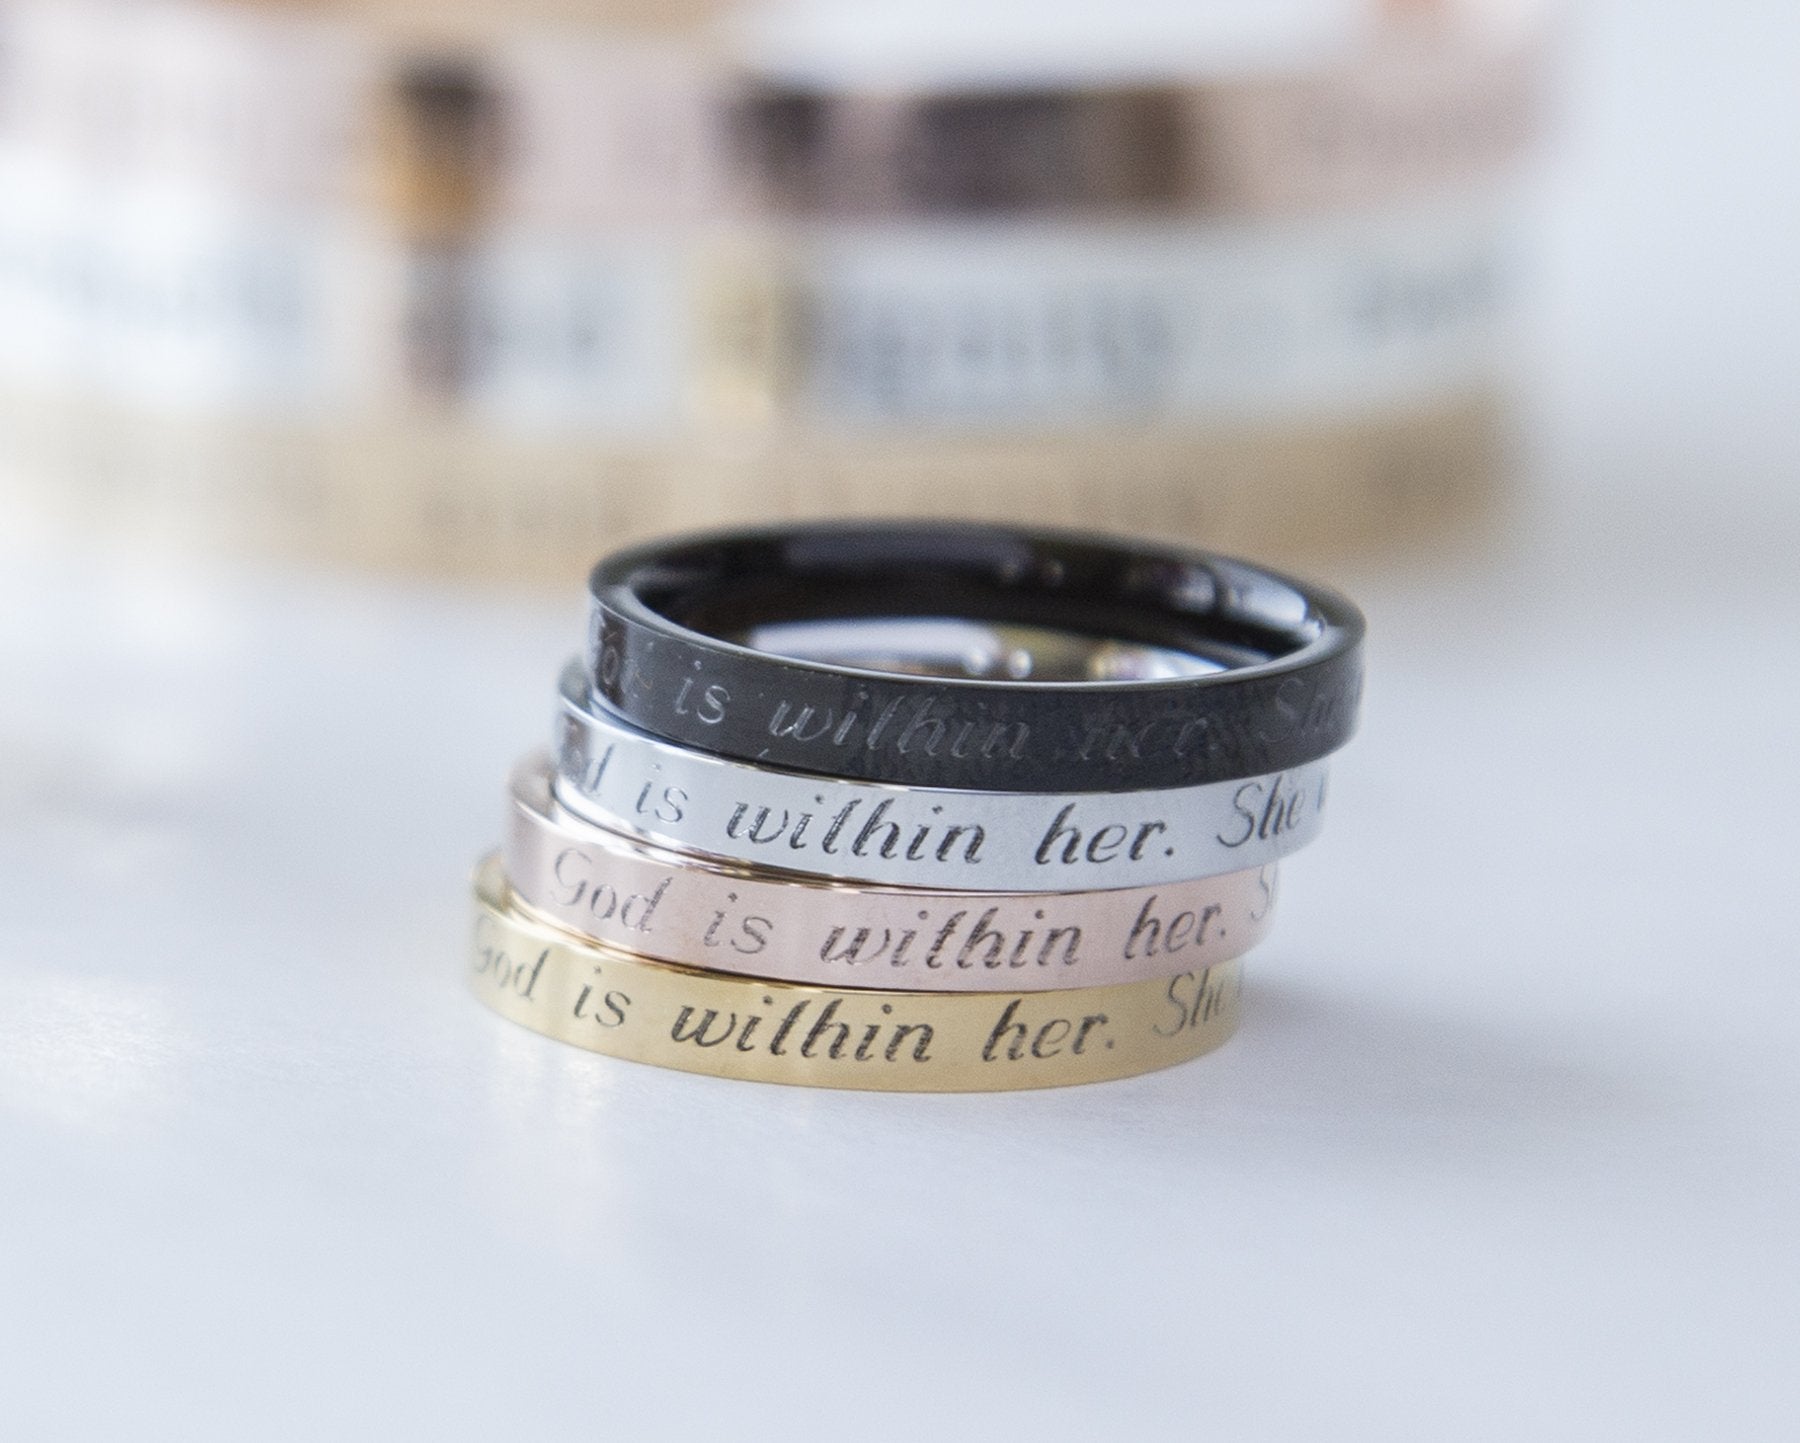 "Psalm 46:5 Engraved Ring - Stainless Steel with Gold, Rose Gold or Black Plating"
Keywords: Psalm 46:5, engraved ring, stainless steel, gold, rose gold, black plating. Bijou Her